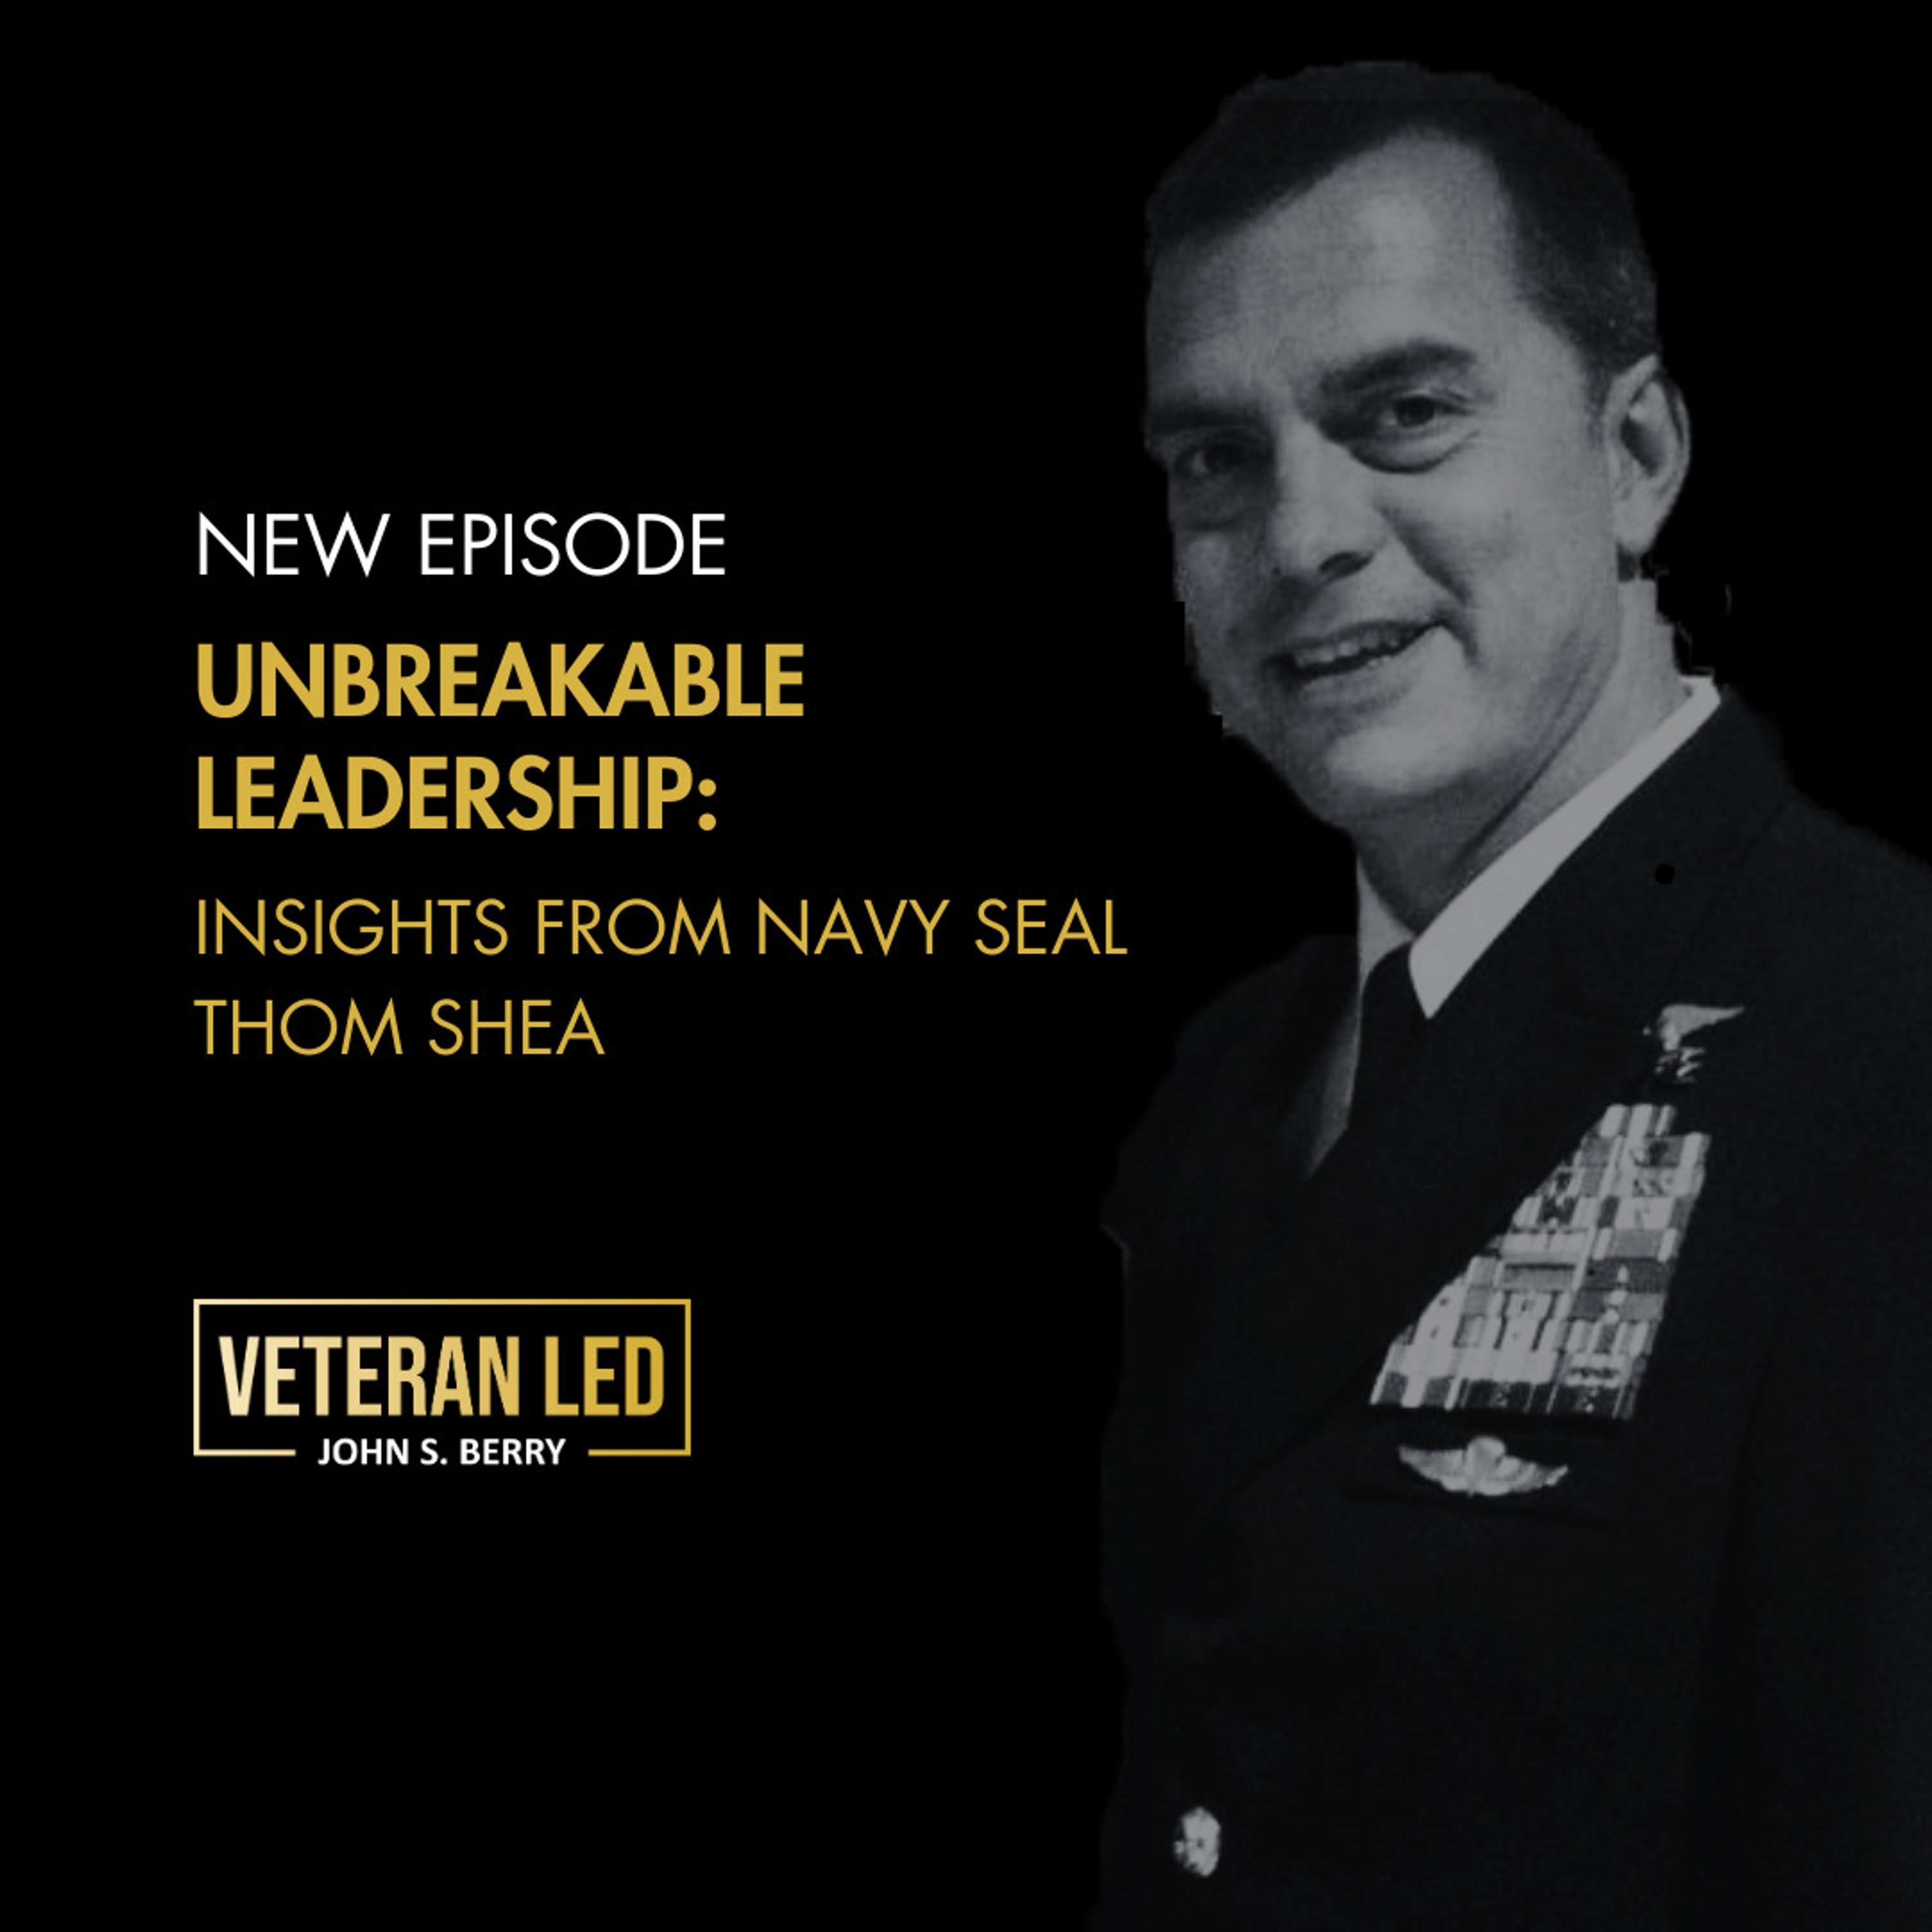 Unbreakable Leadership: Insights from Navy SEAL Thom Shea